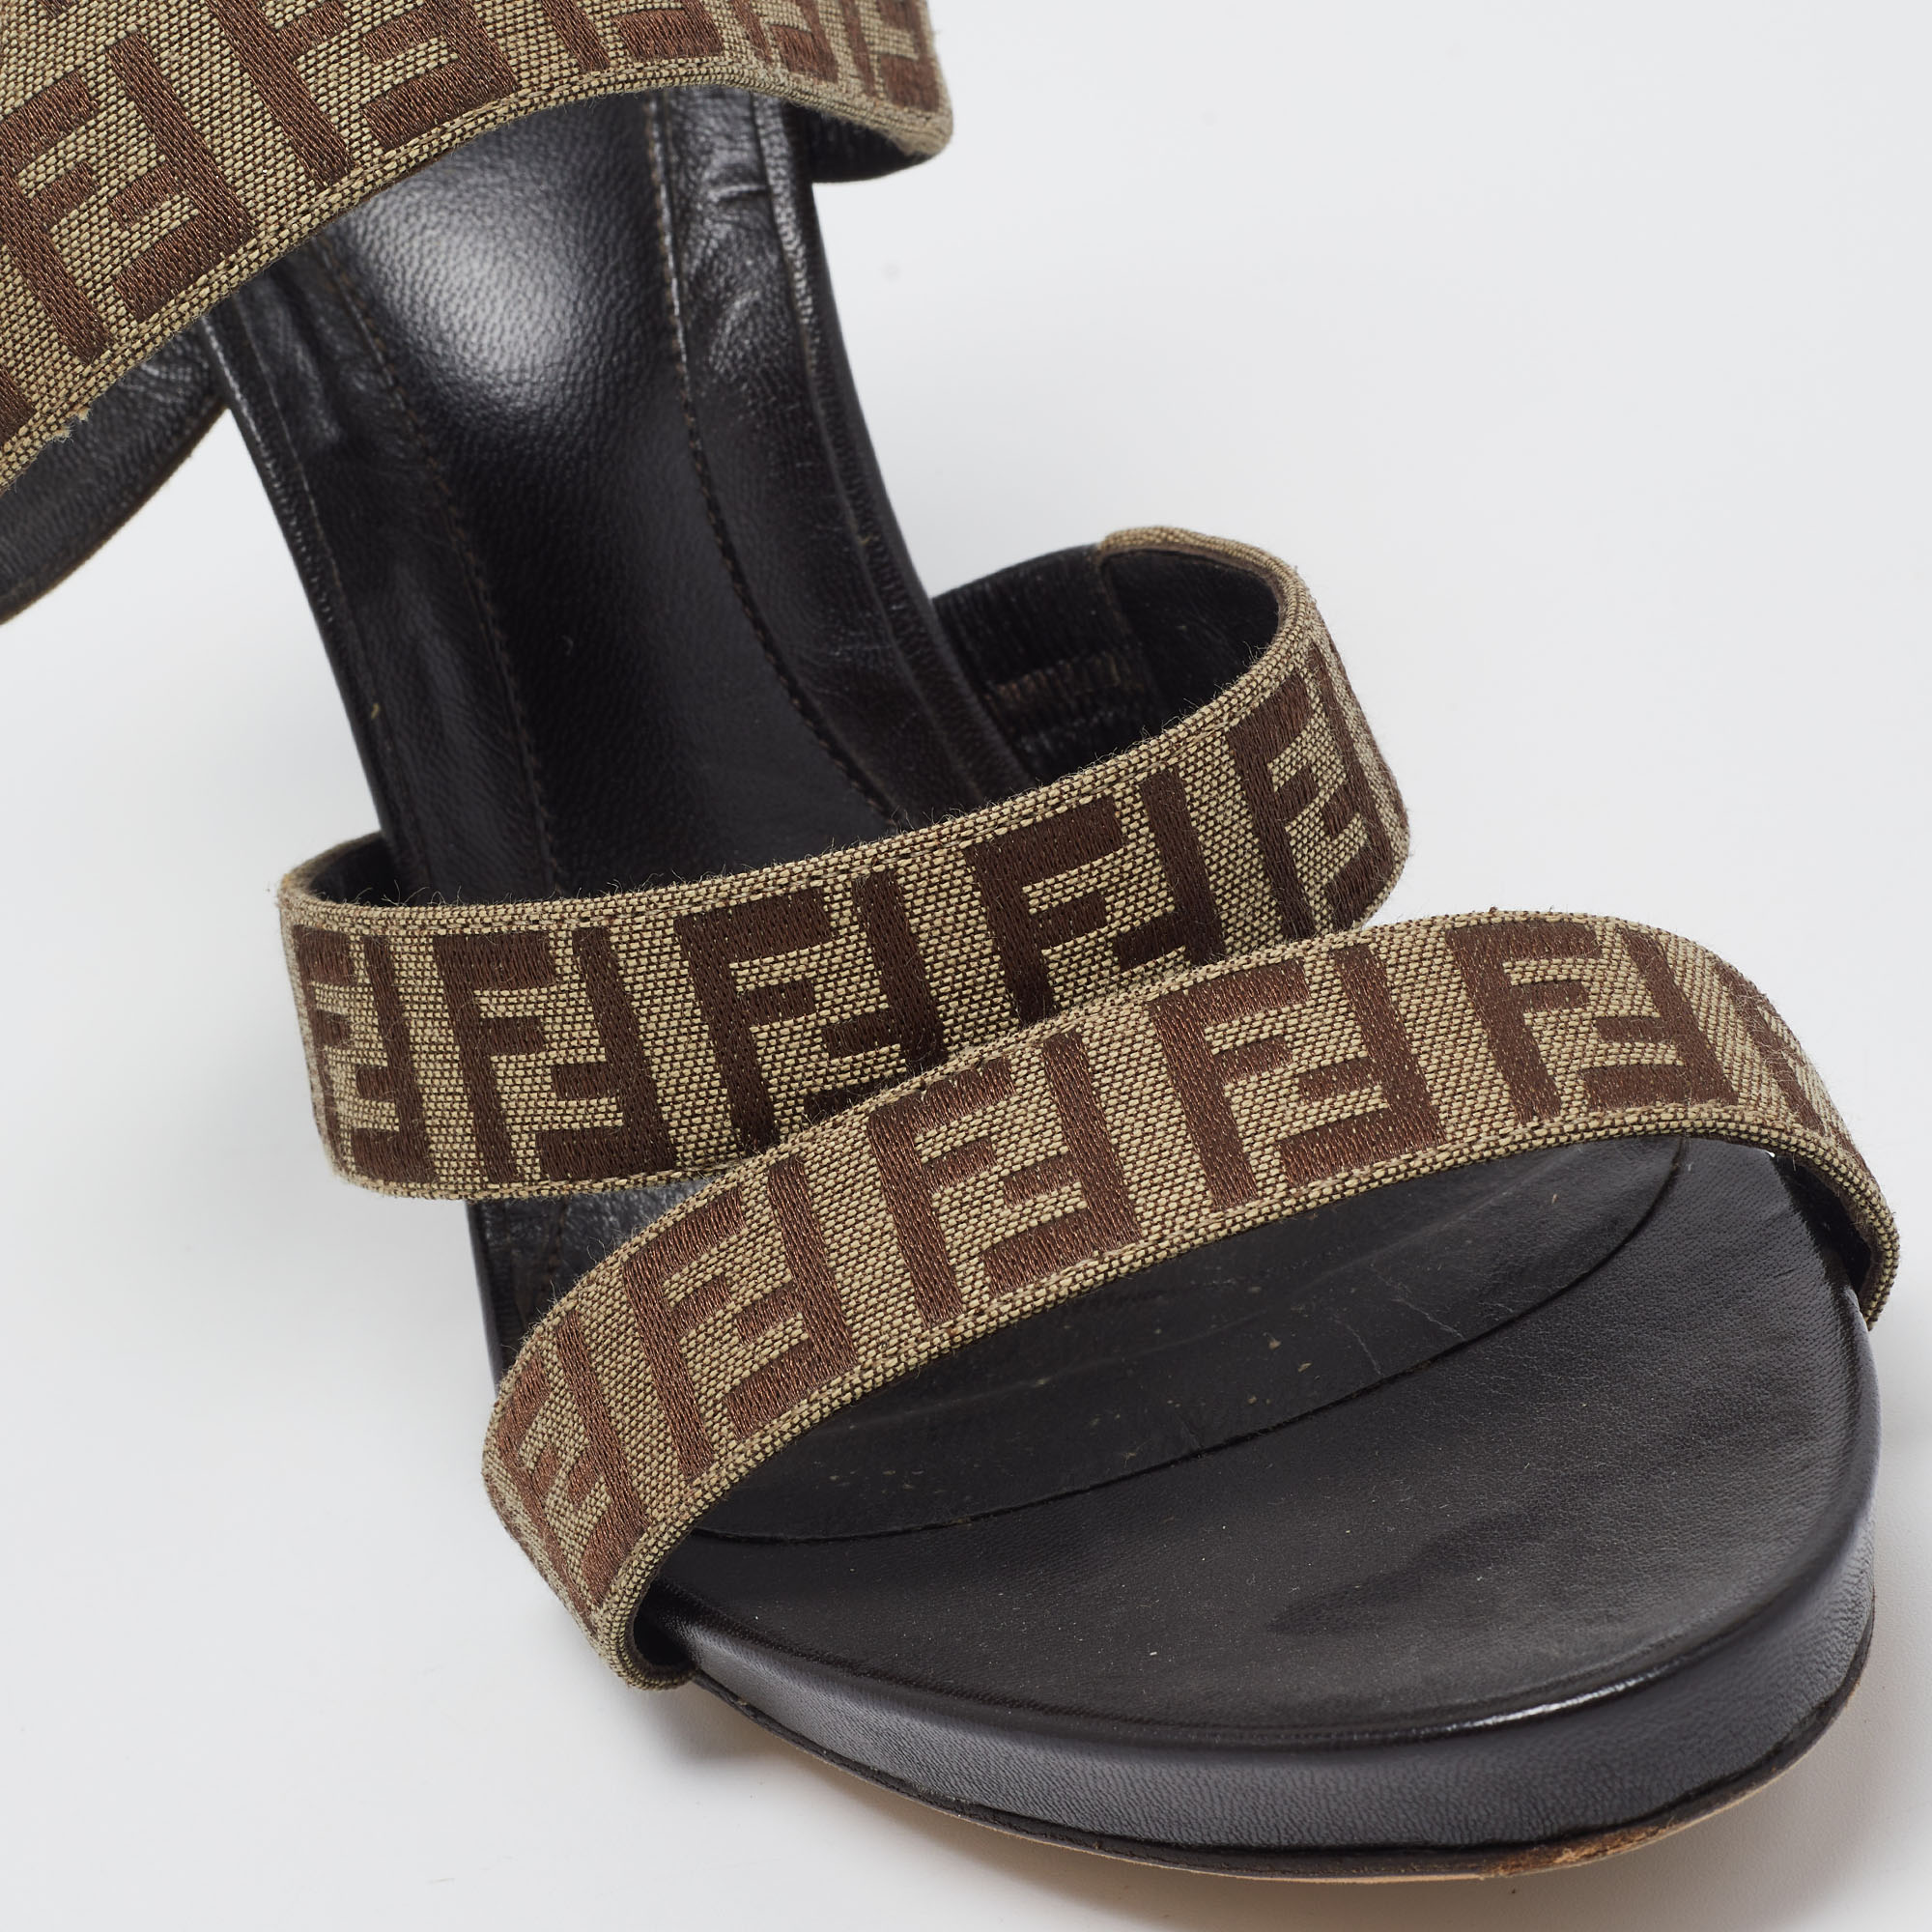 Fendi Brown/Beige Canvas And Leather Wedge Sandals Size 39